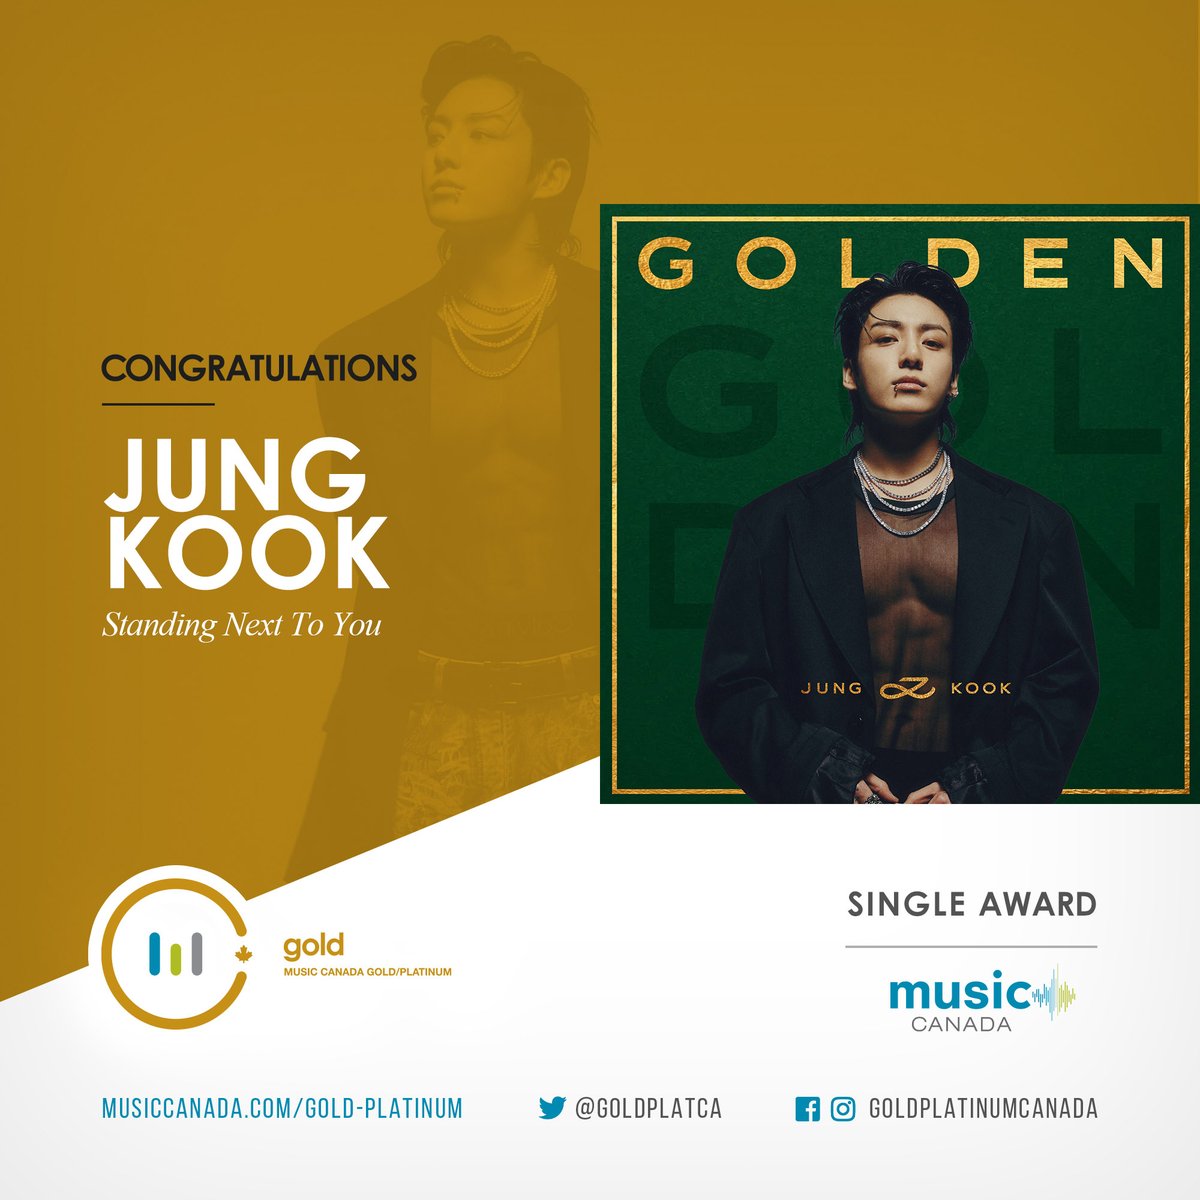 Congratulations to @BTS_Junngkook for three new certifications🍁💿 '3D' ft. @jackharlow goes Gold, 'Seven' ft. @Latto hits Double Platinum, and 'Standing Next to You' achieves Gold in Canada